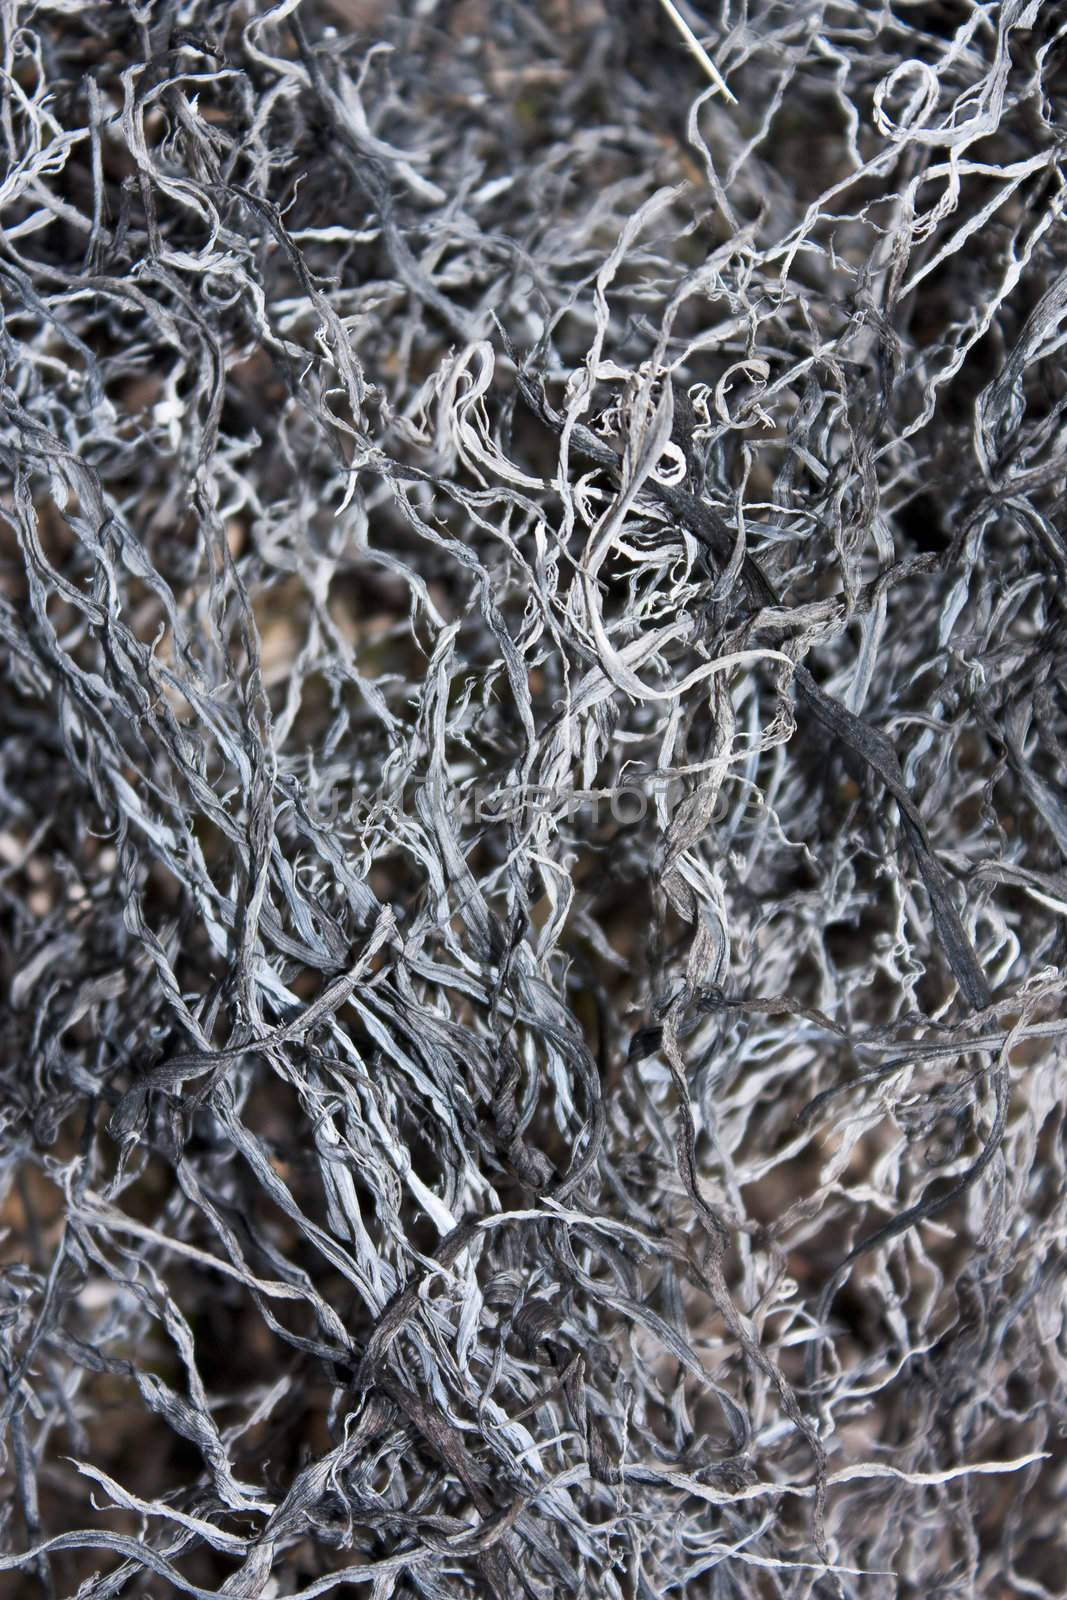 The texture of hot ash